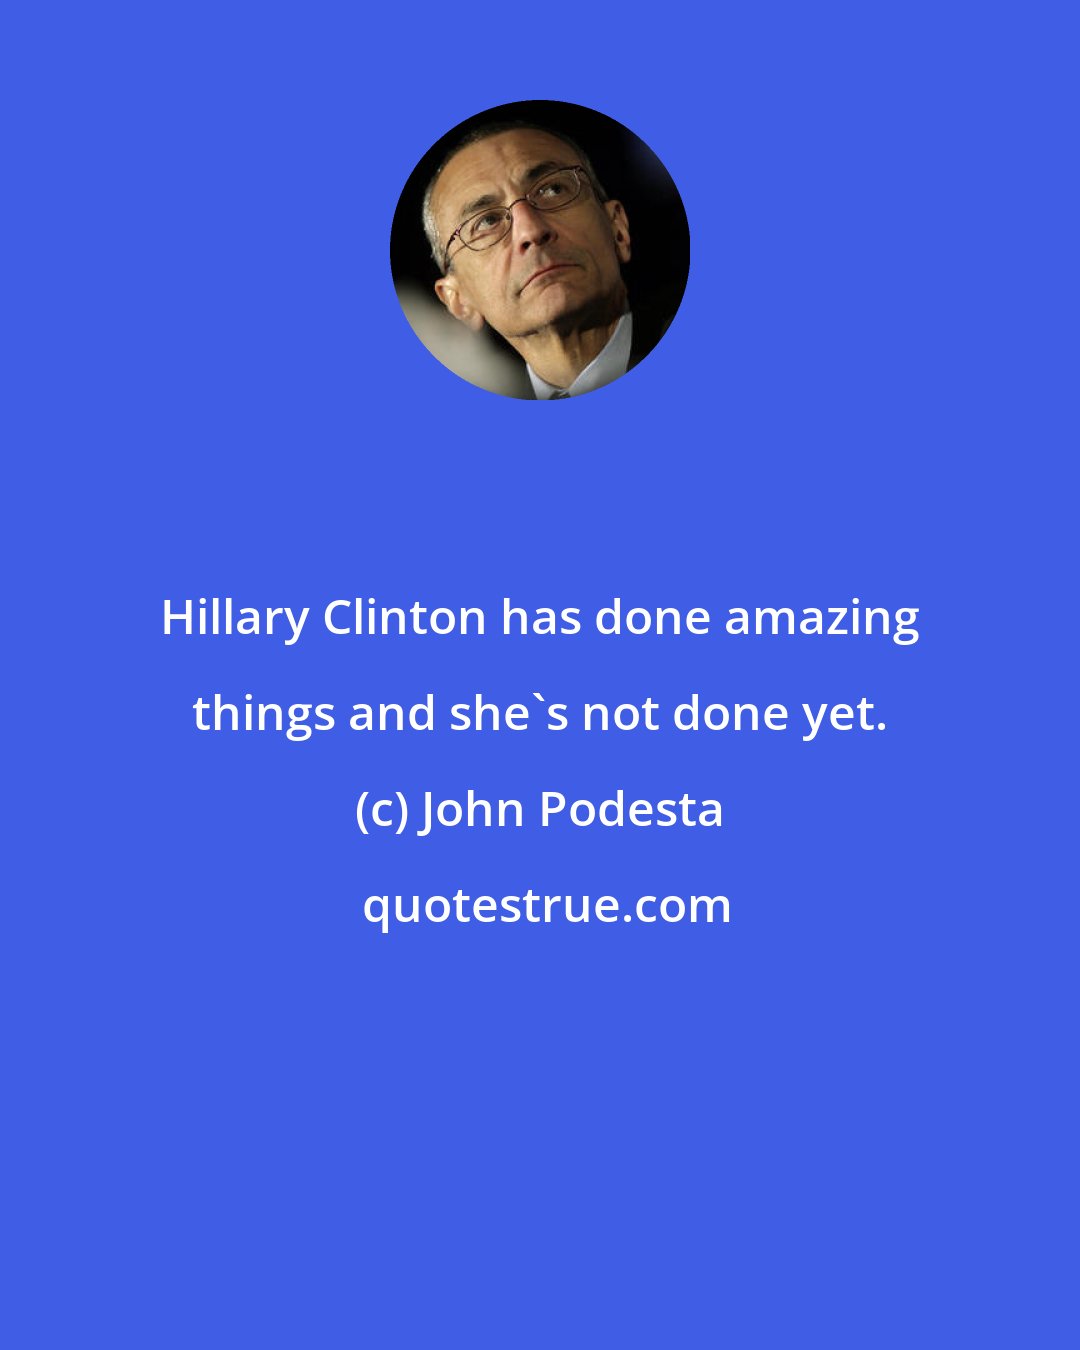 John Podesta: Hillary Clinton has done amazing things and she's not done yet.